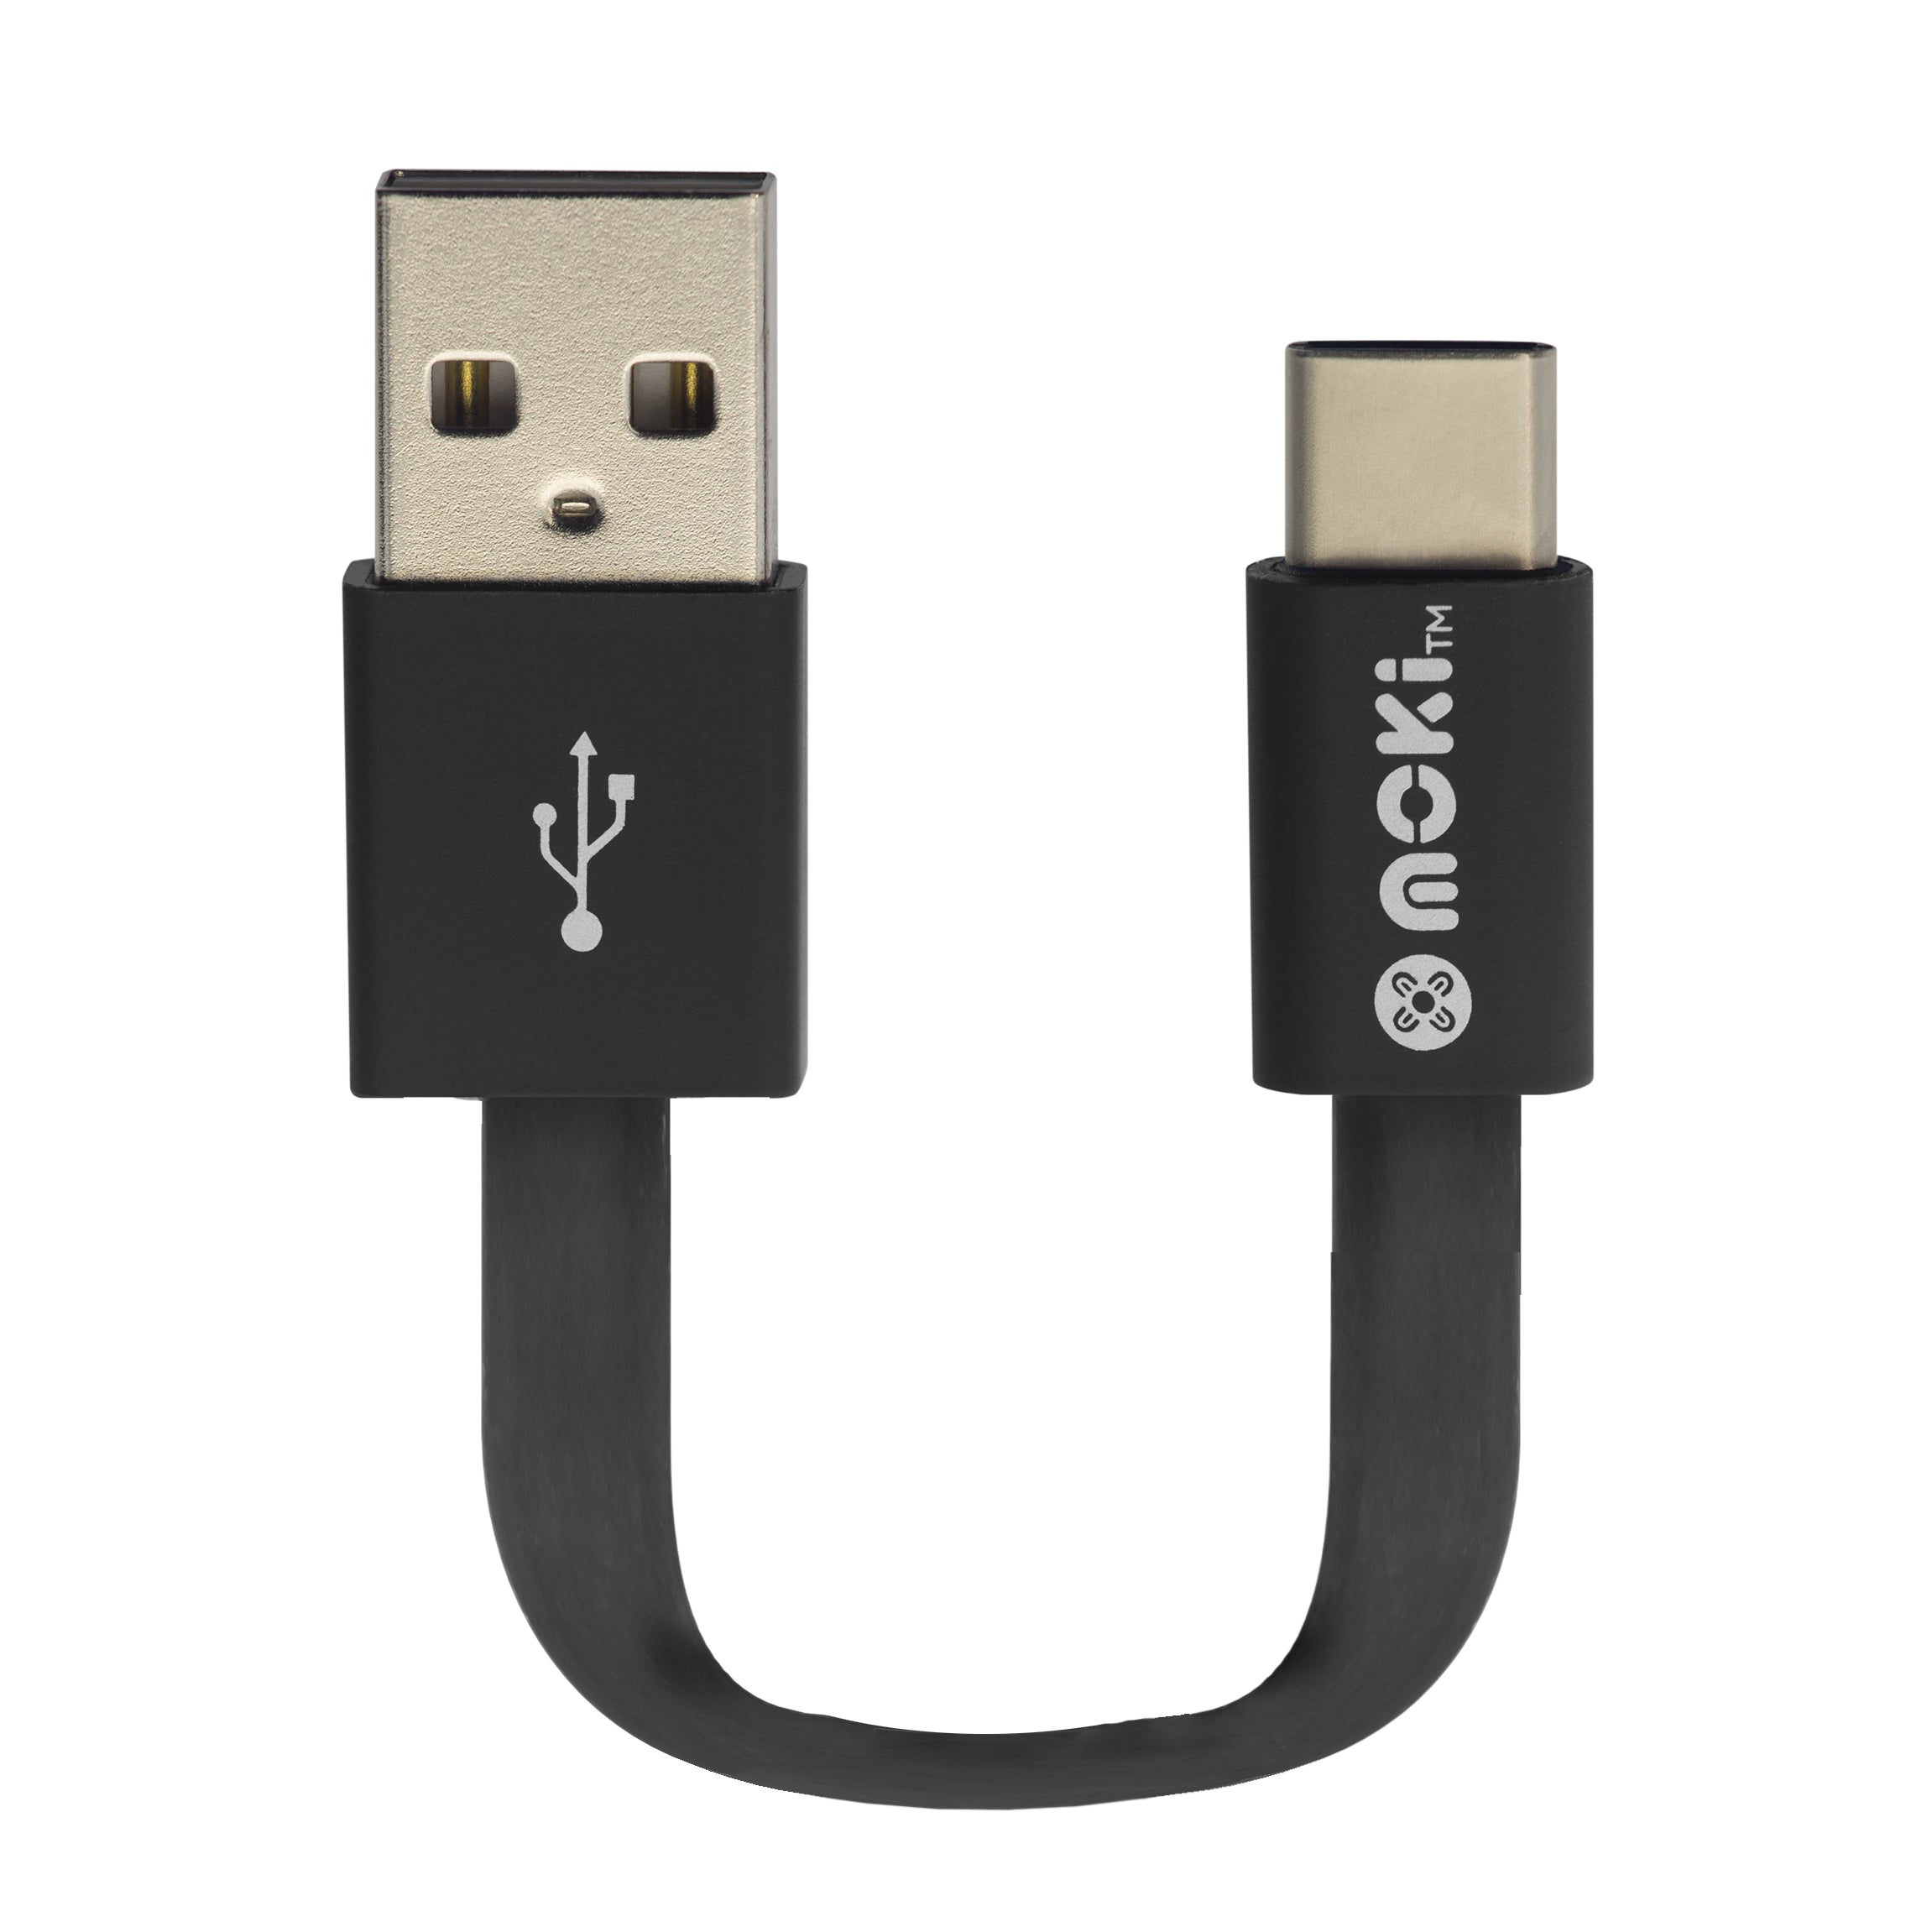 Pocket Type-C SynCharge Cable - 10cm/4"